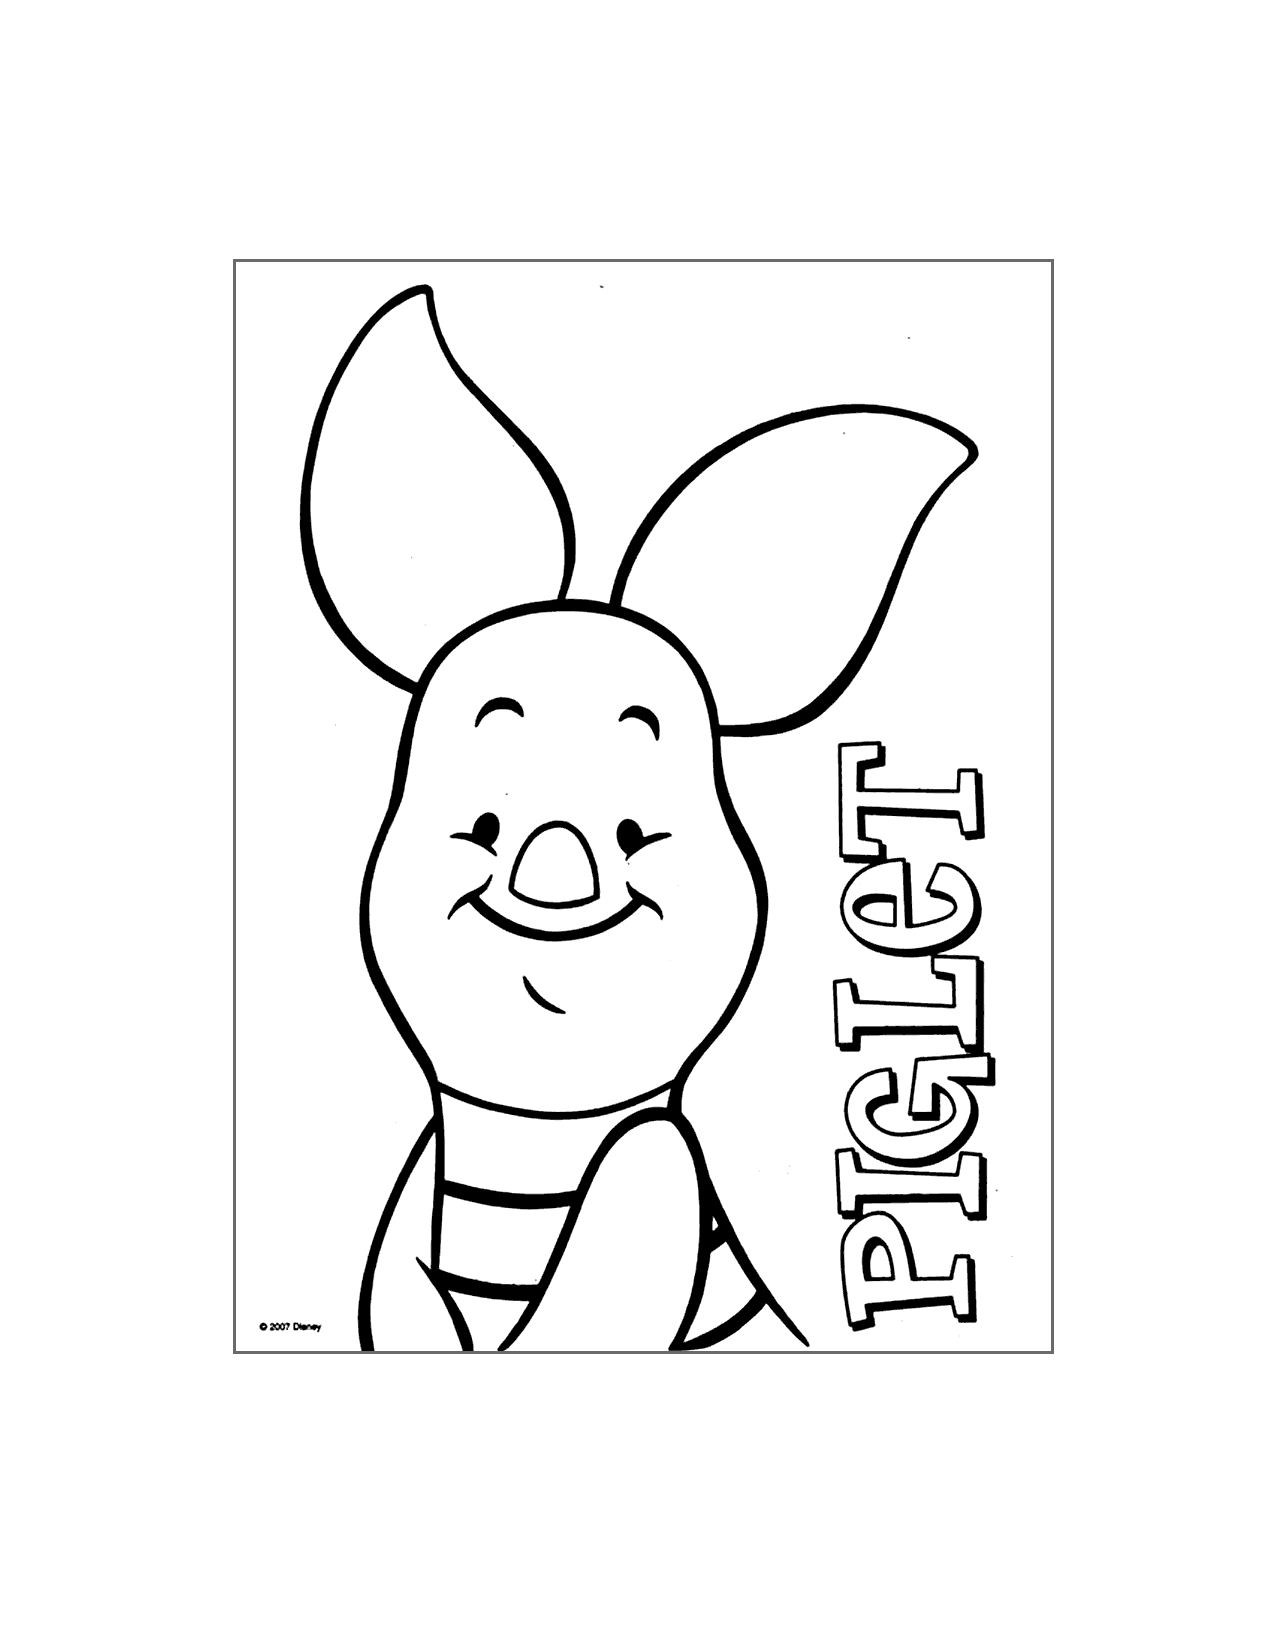 Piglet Coloring Page